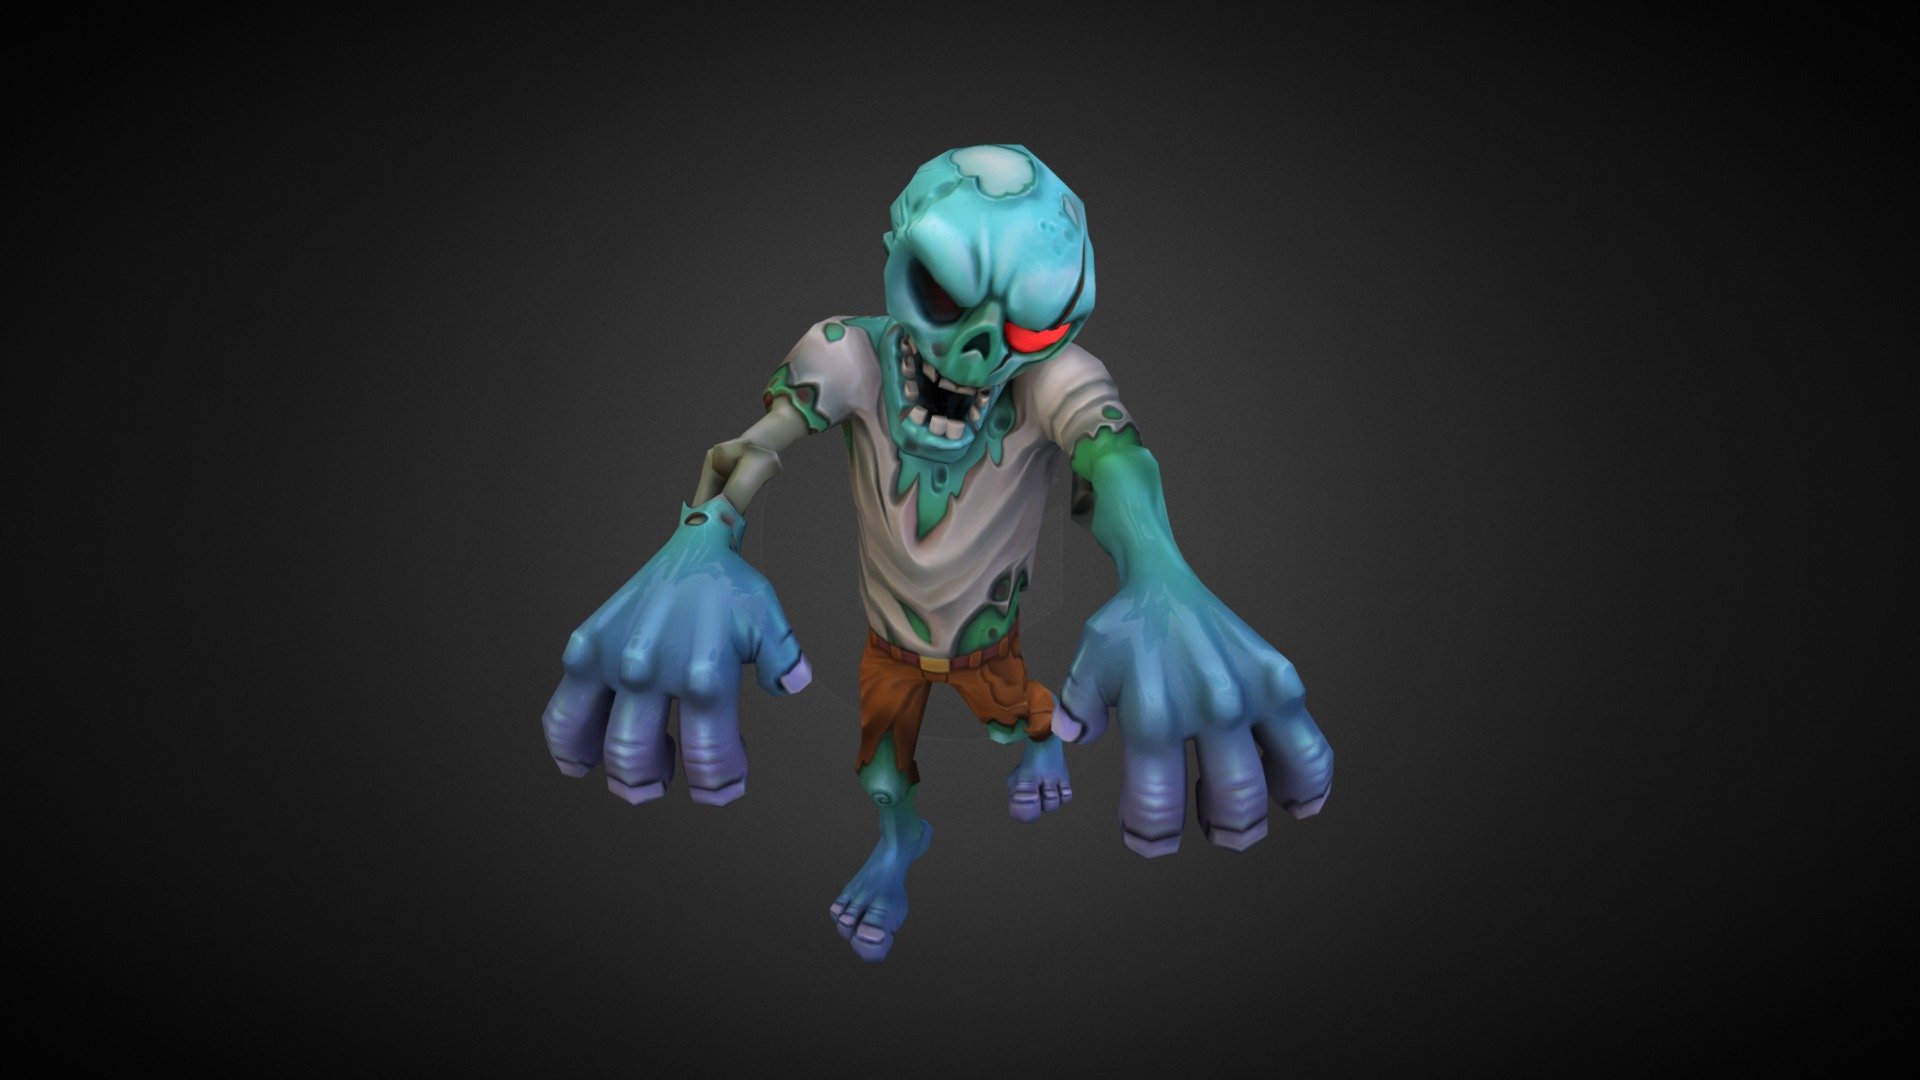 http://store.steampowered.com/app/246400/ - Zombie - 3D model by Thomas Sincich (@thanatos) 3d model